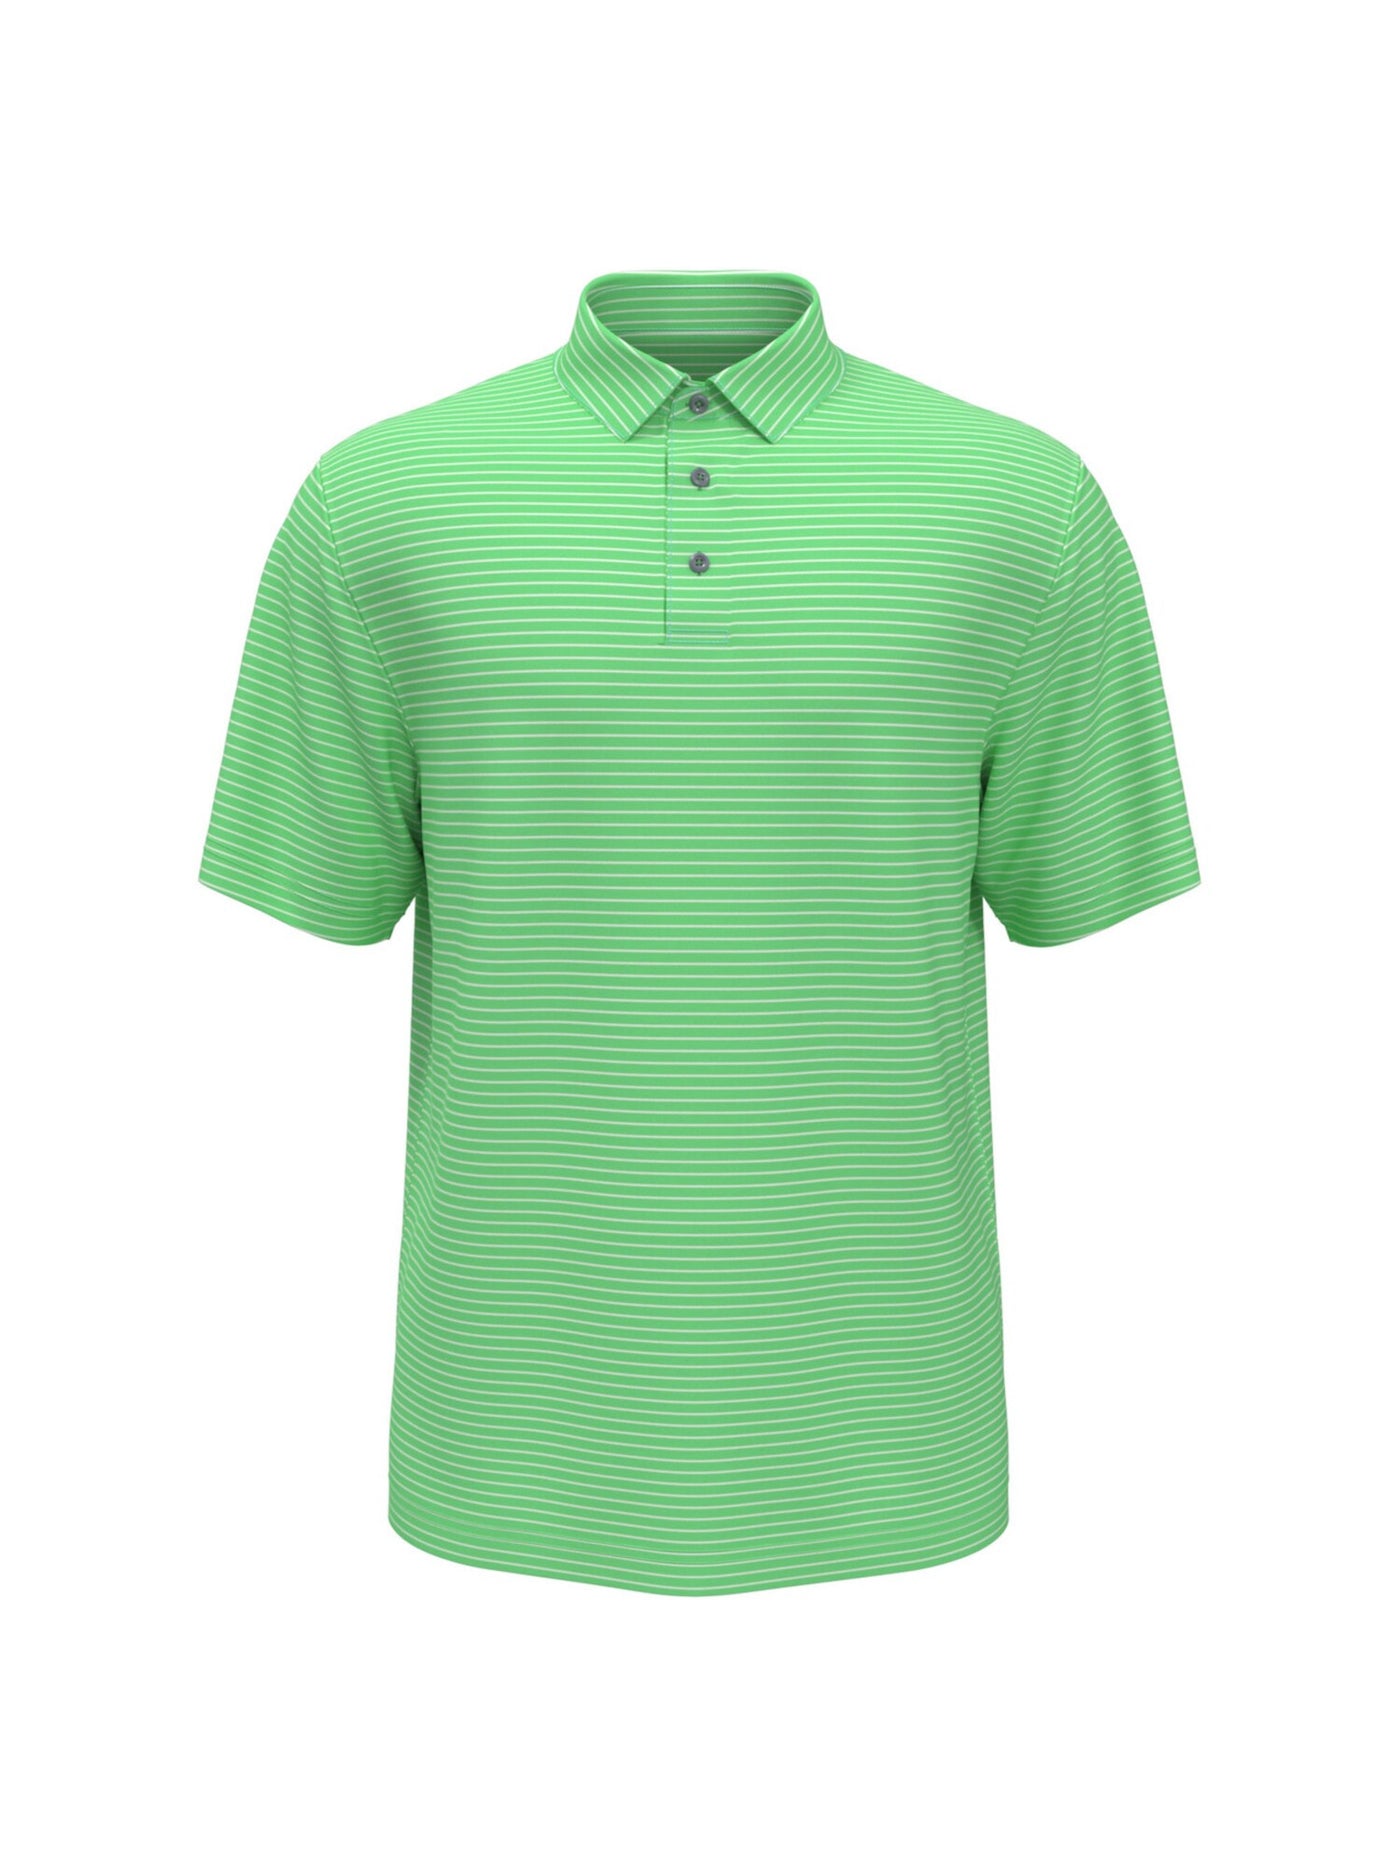 HYBRID APPAREL Mens Green Athletic Fit Moisture Wicking Polo XL